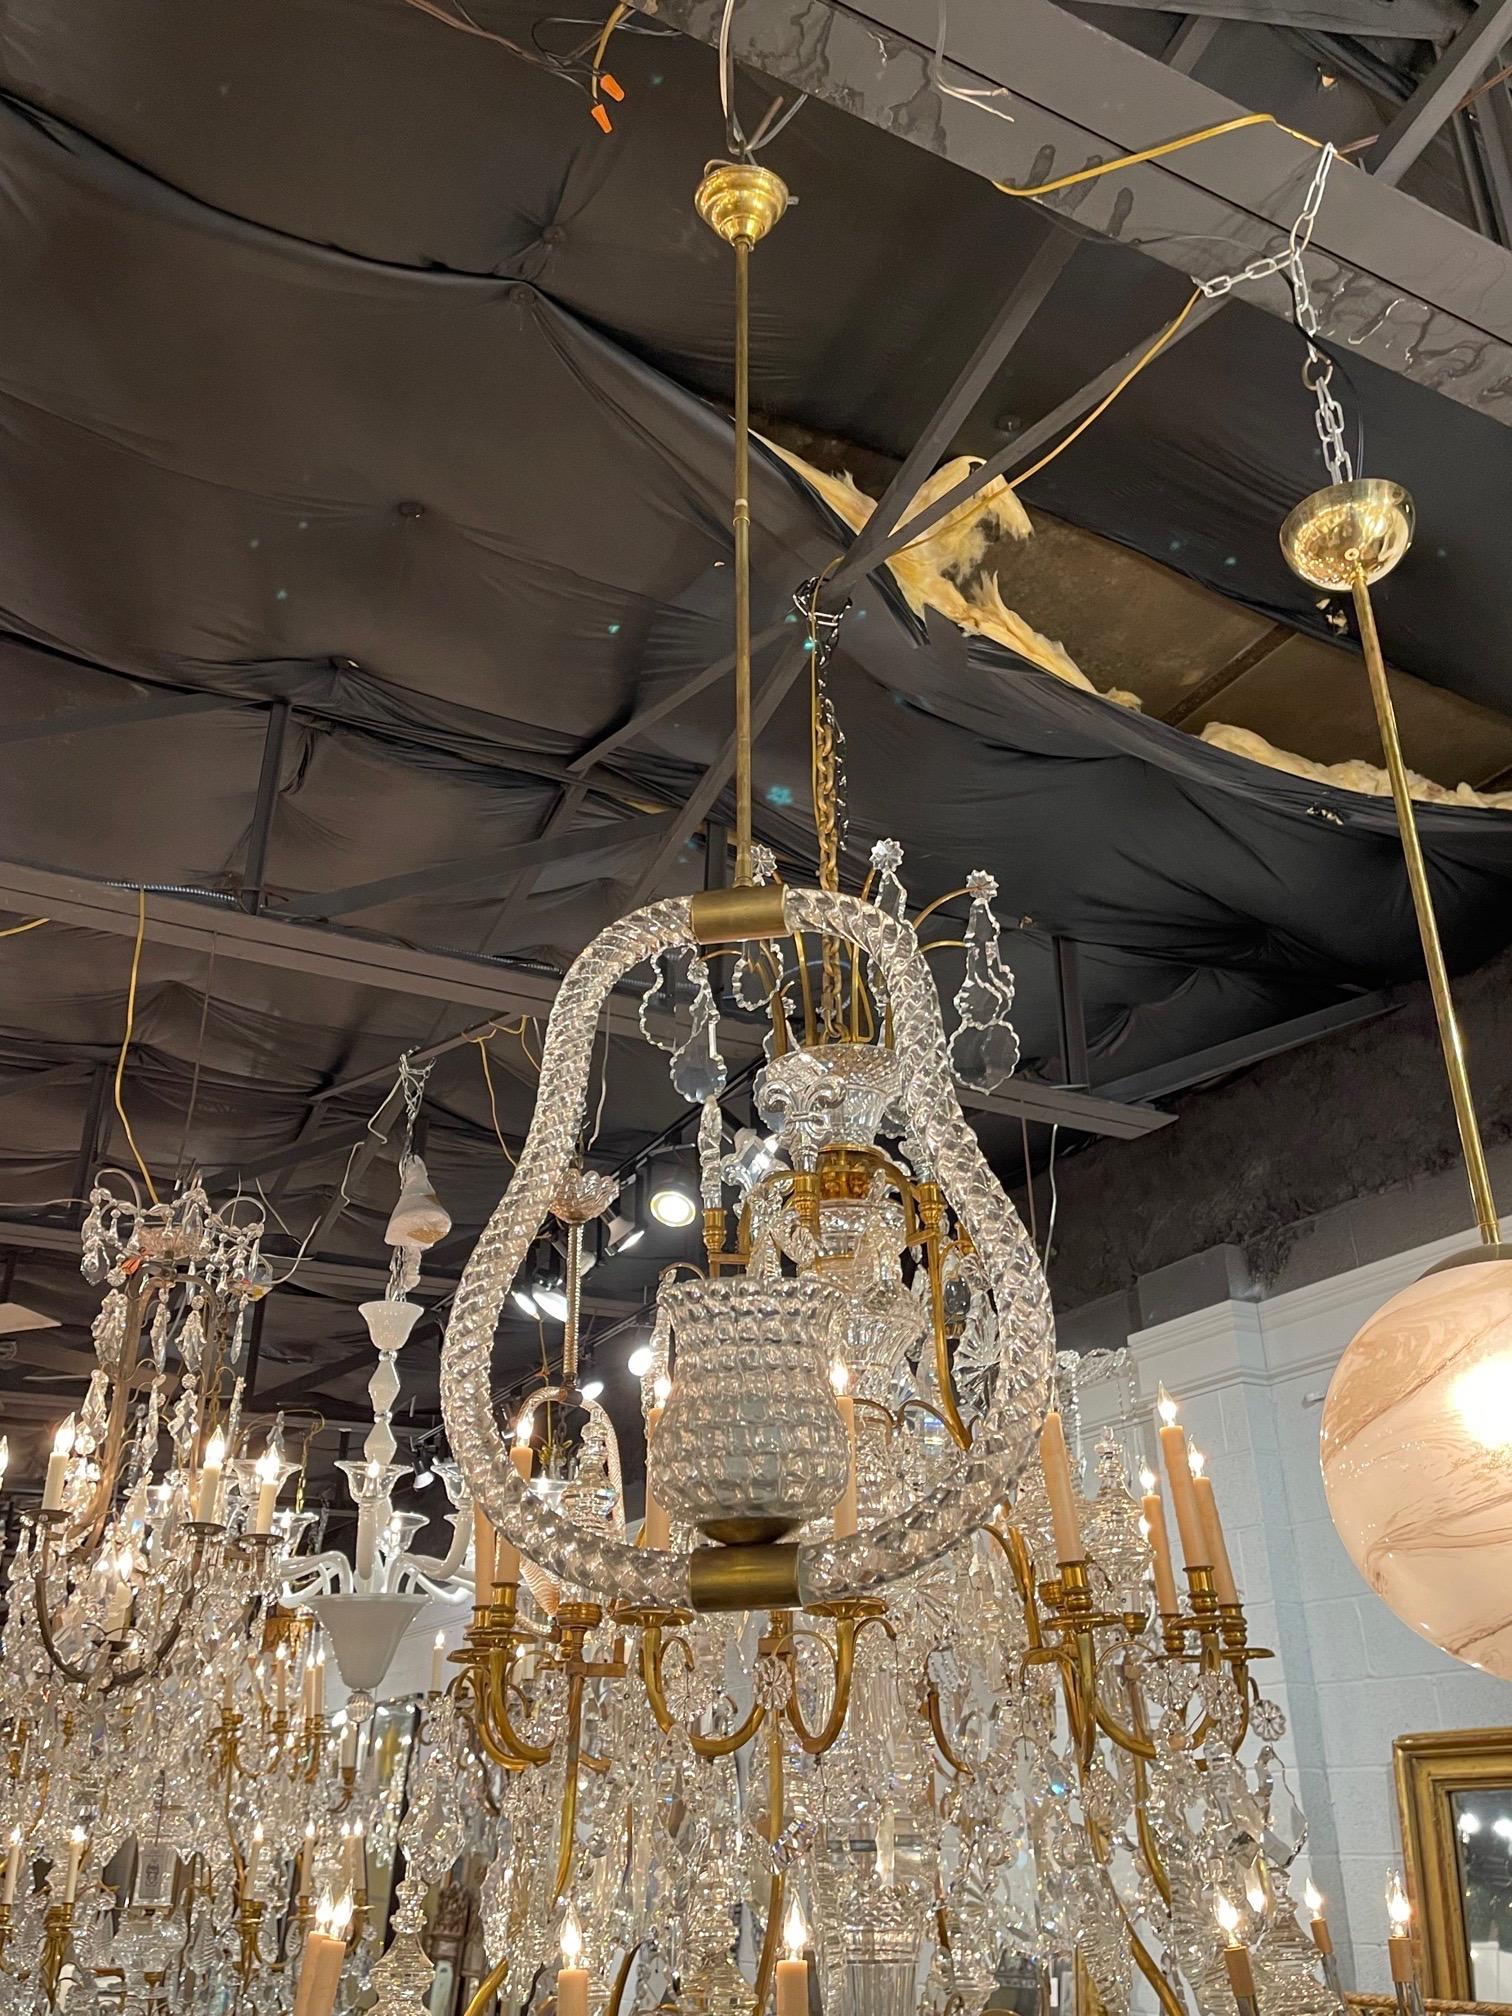 Very nice vintage murano glass pendant light by Barovier. Beautiful transparent textured glass with brass details. A beautiful decorative fixture!!